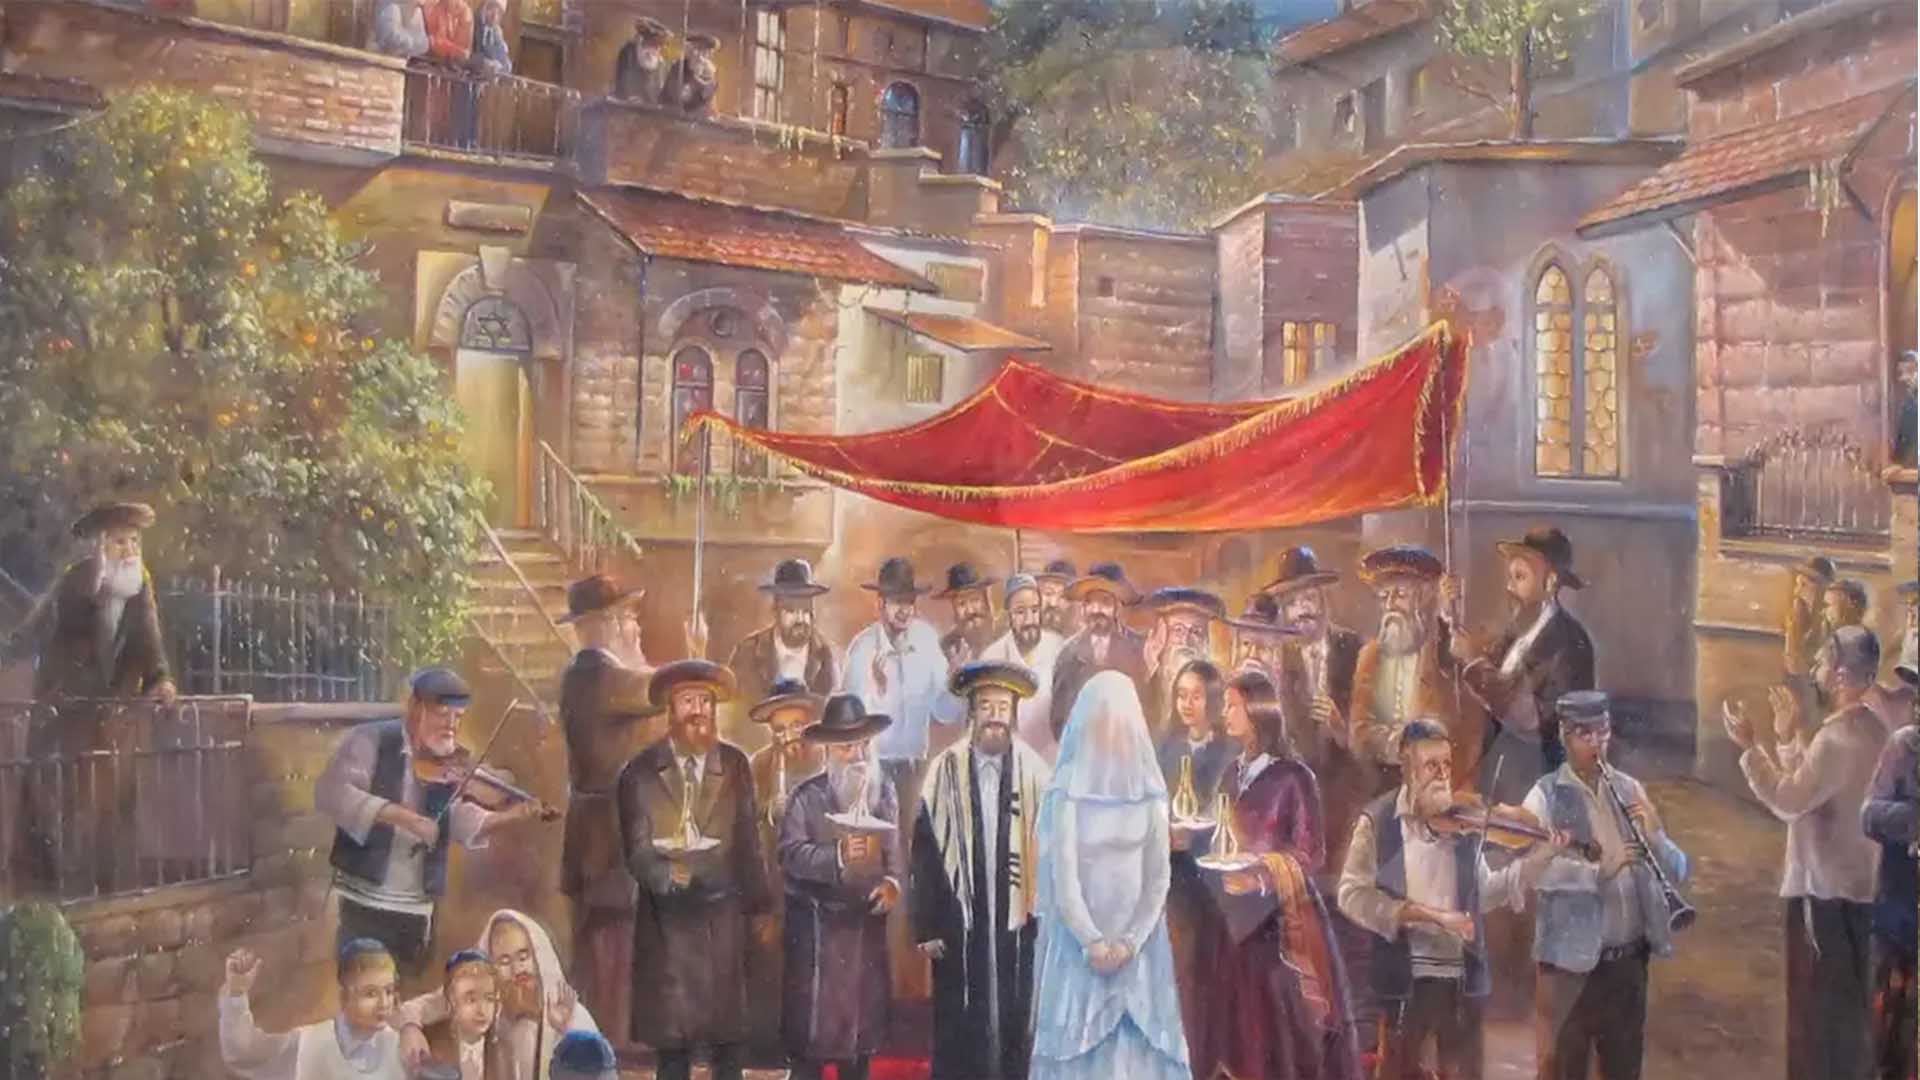 The Founding Father and the Huppah